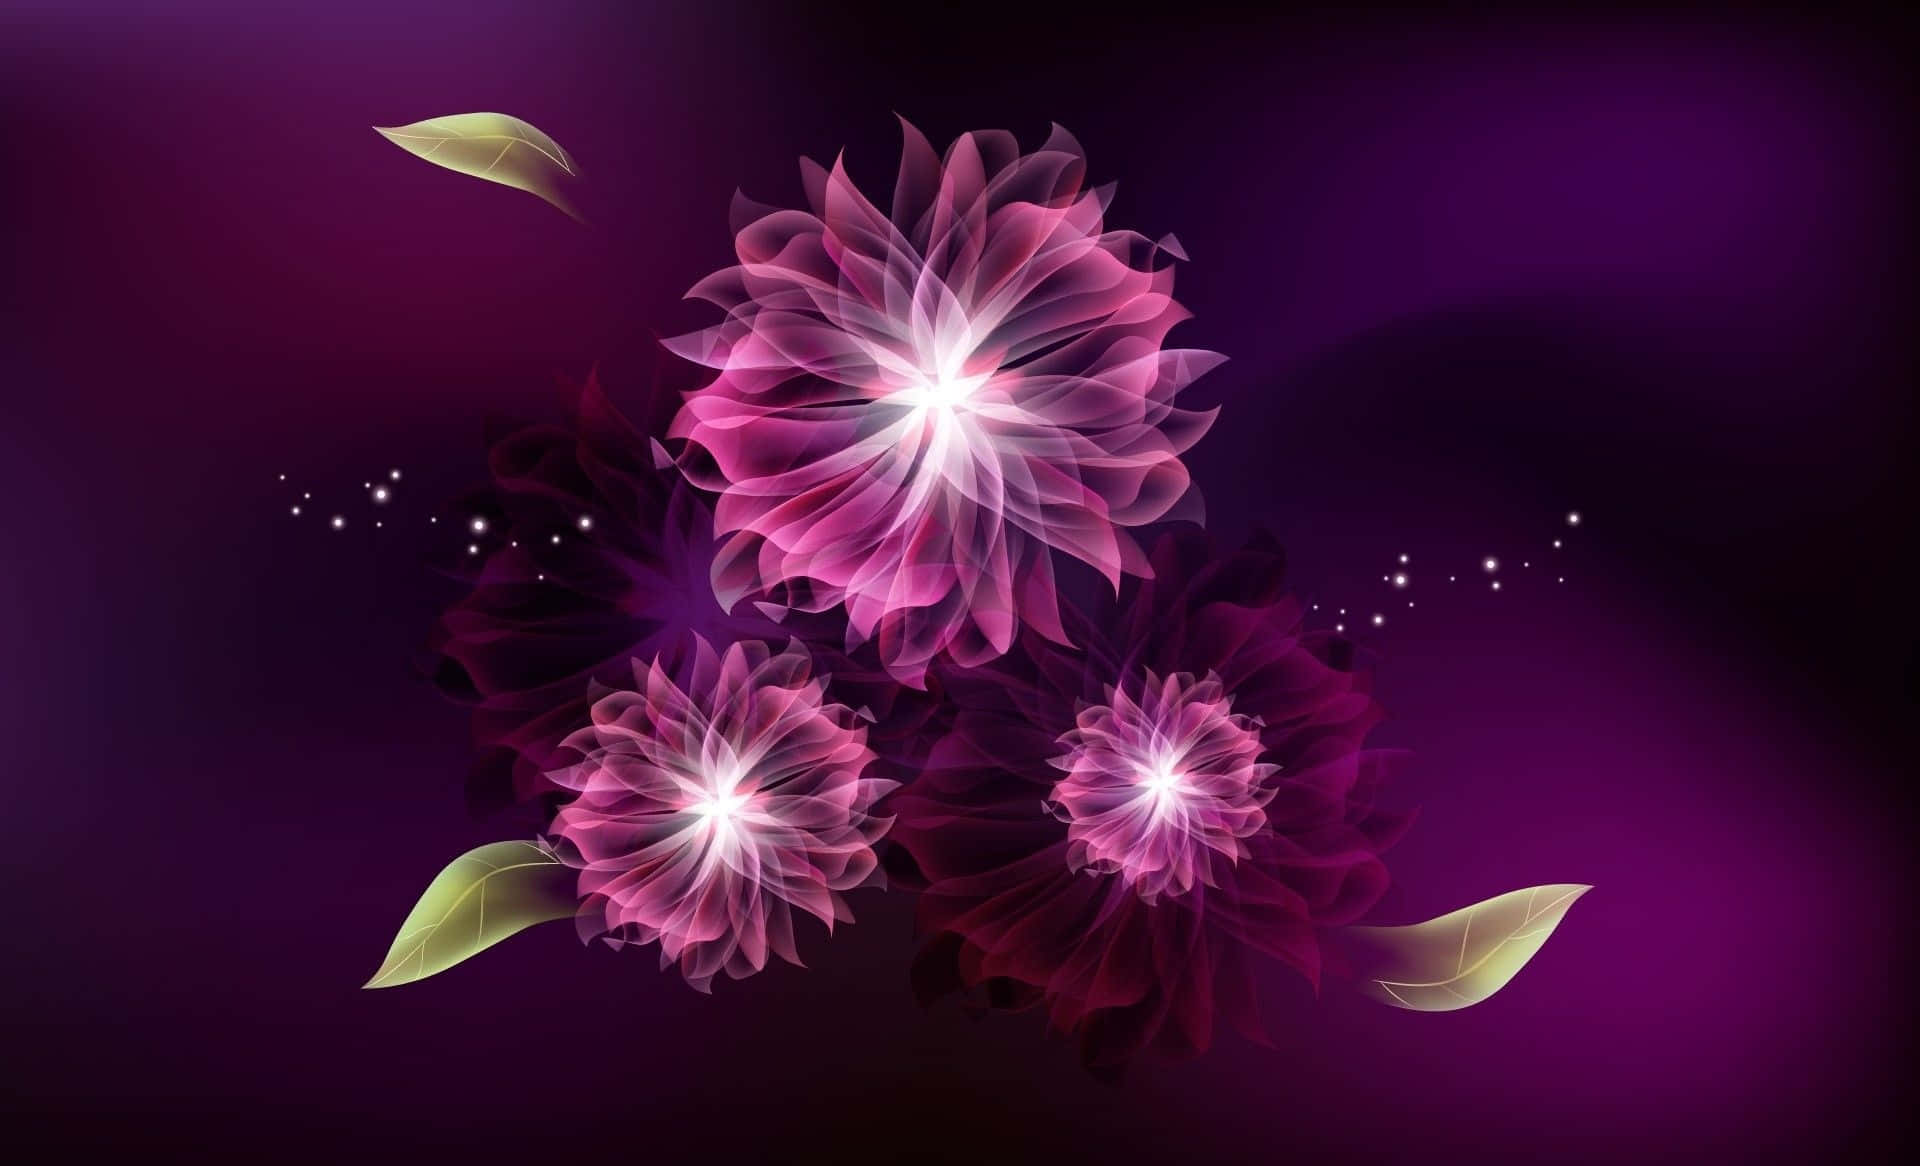 Captivating Flower Art: A Serene and Delicate Masterpiece Wallpaper